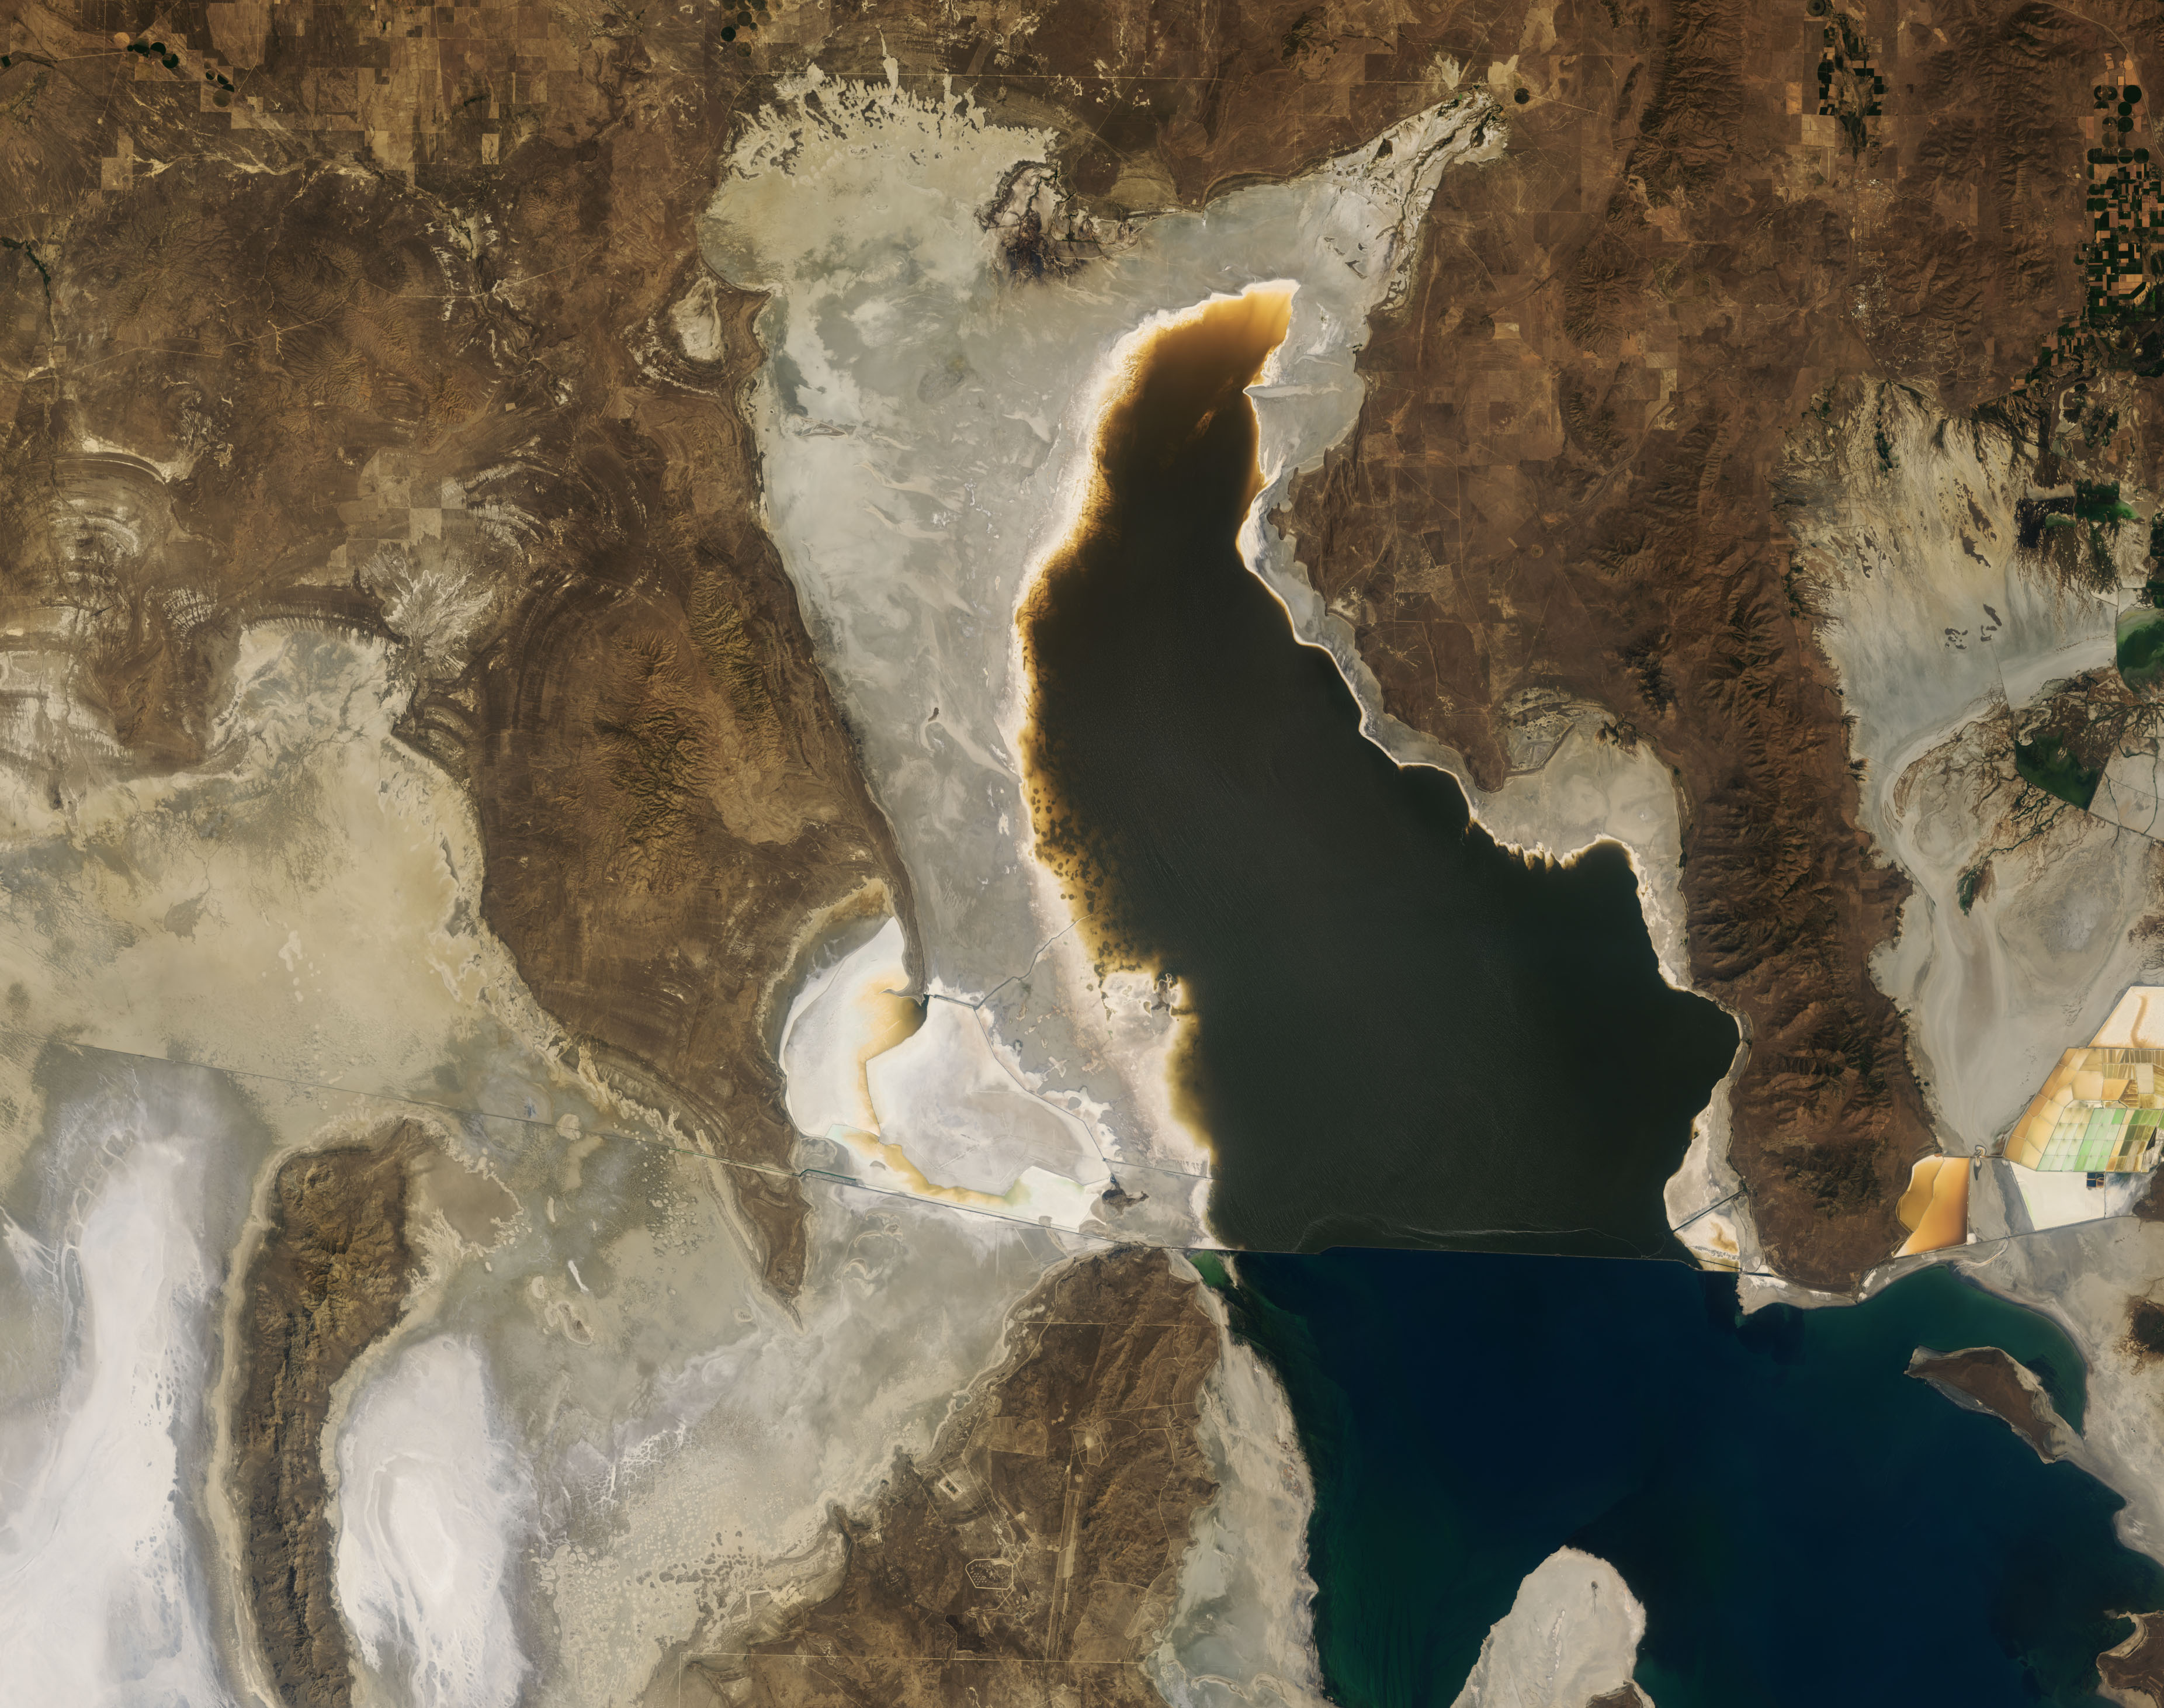 The "Great Salt Lake" in Utah, the United States has the lowest water